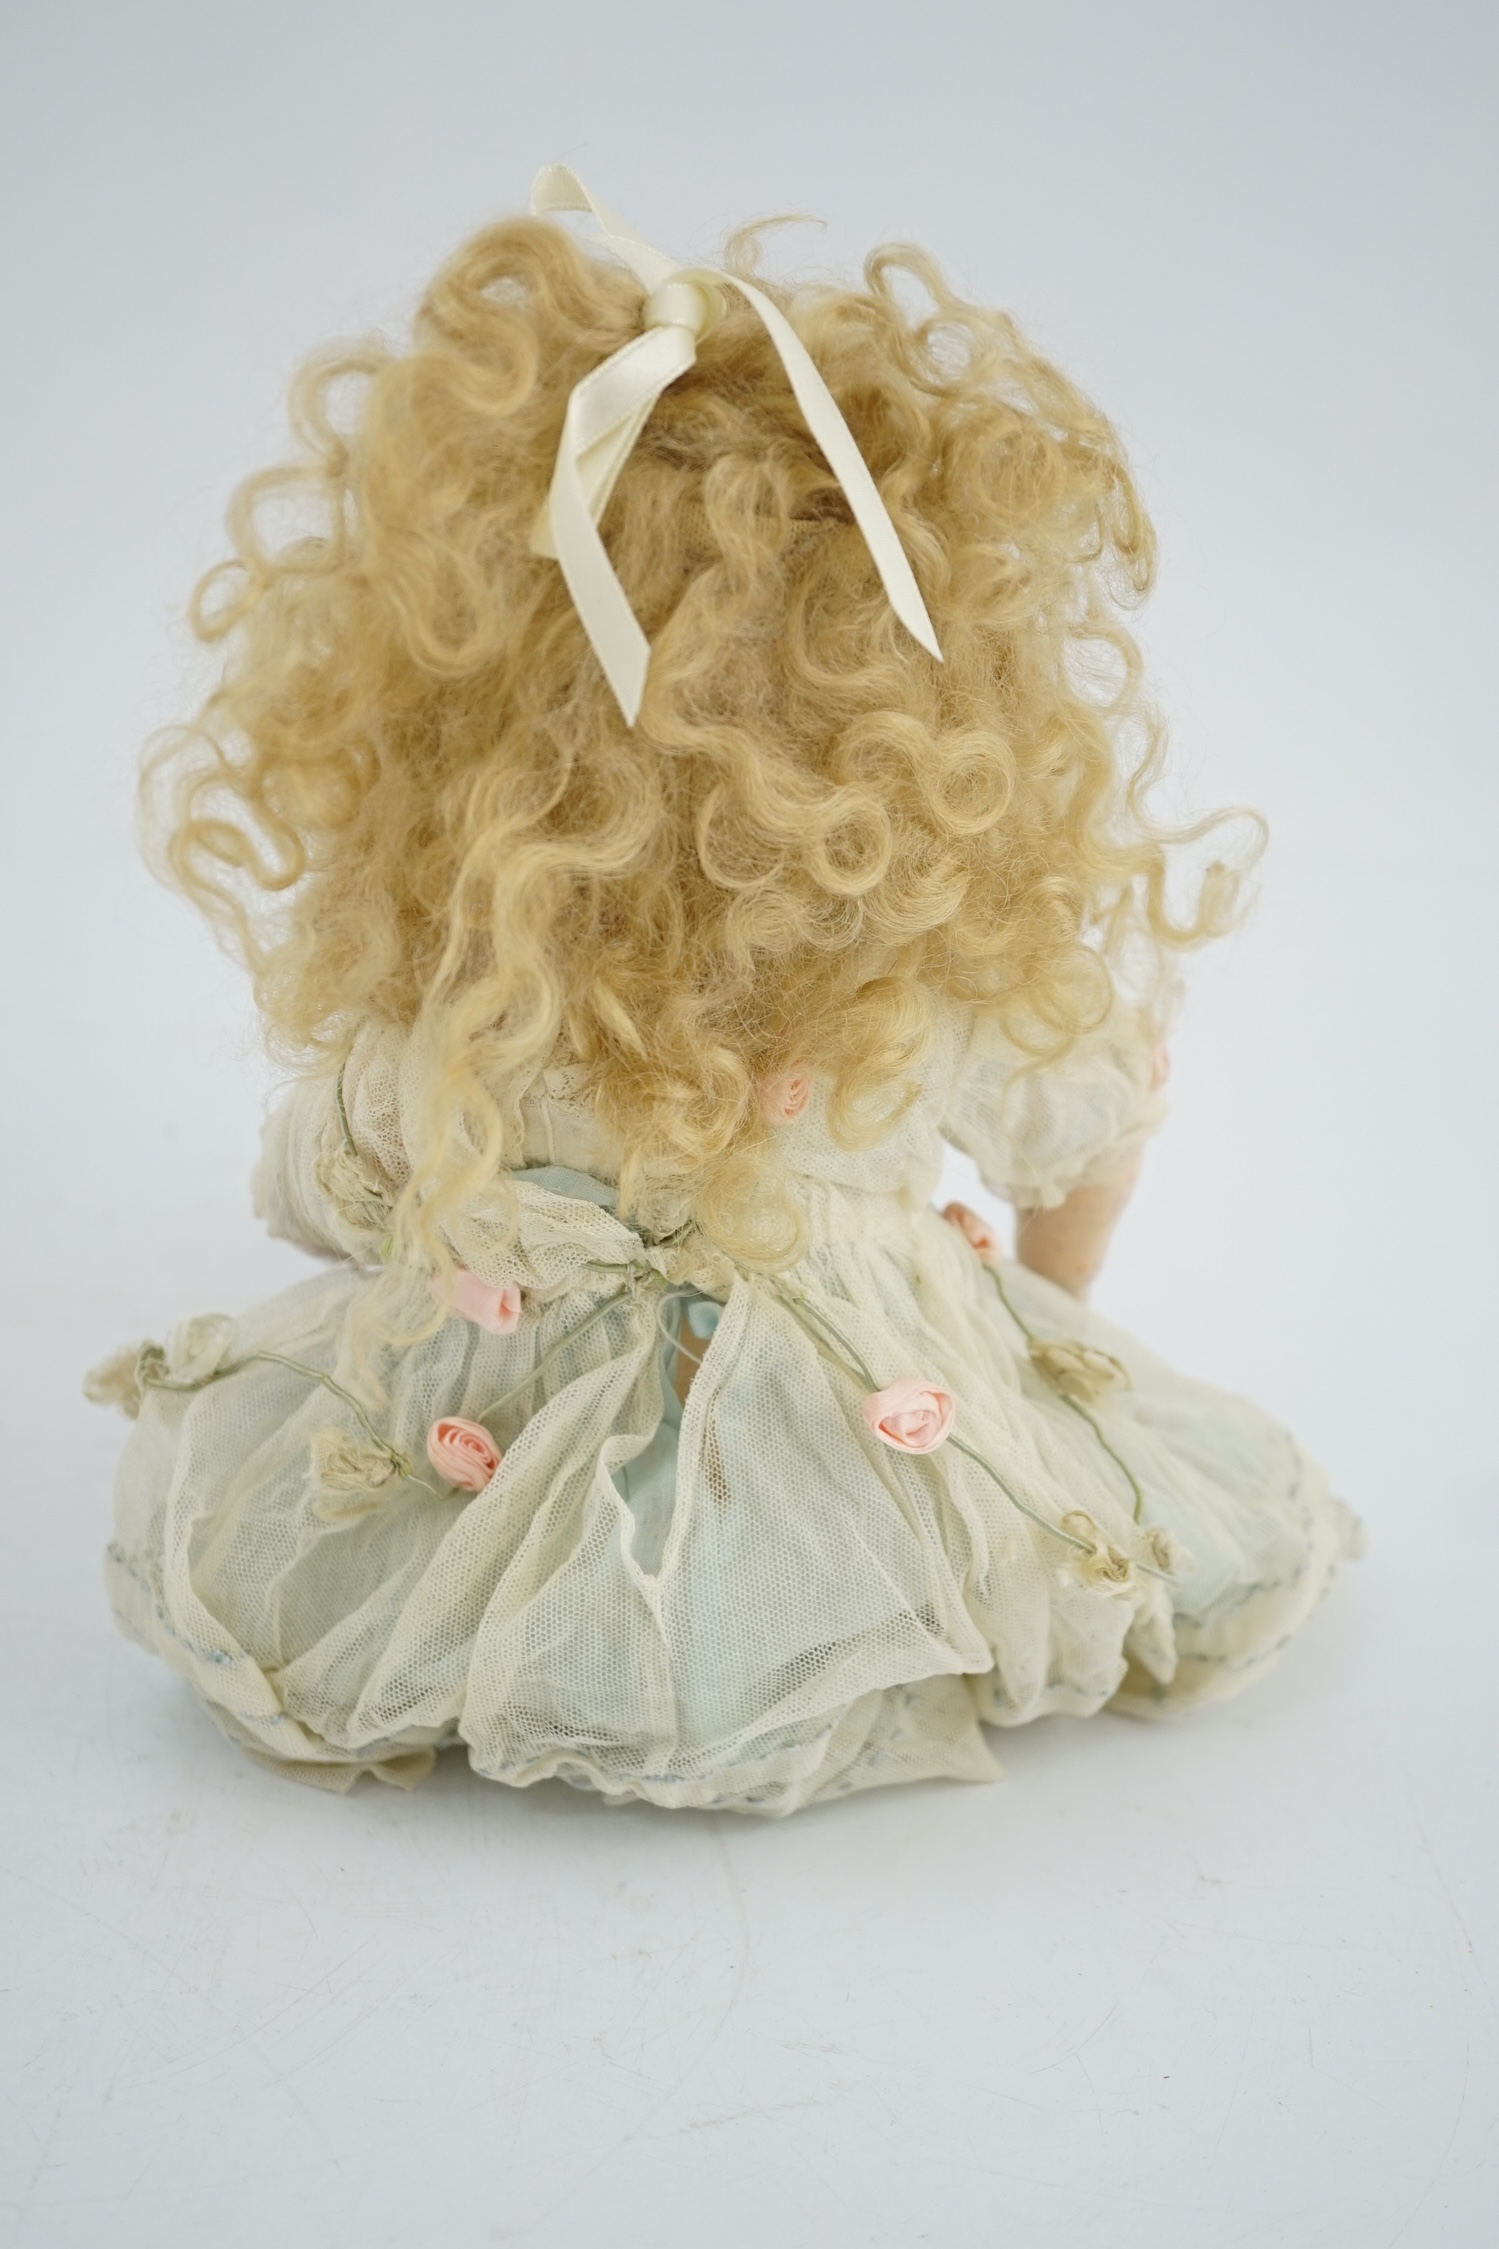 A Kammer & Reinhart / S & H bisque head doll, pierced ears, vintage clothes, one finger missing, - Image 5 of 5